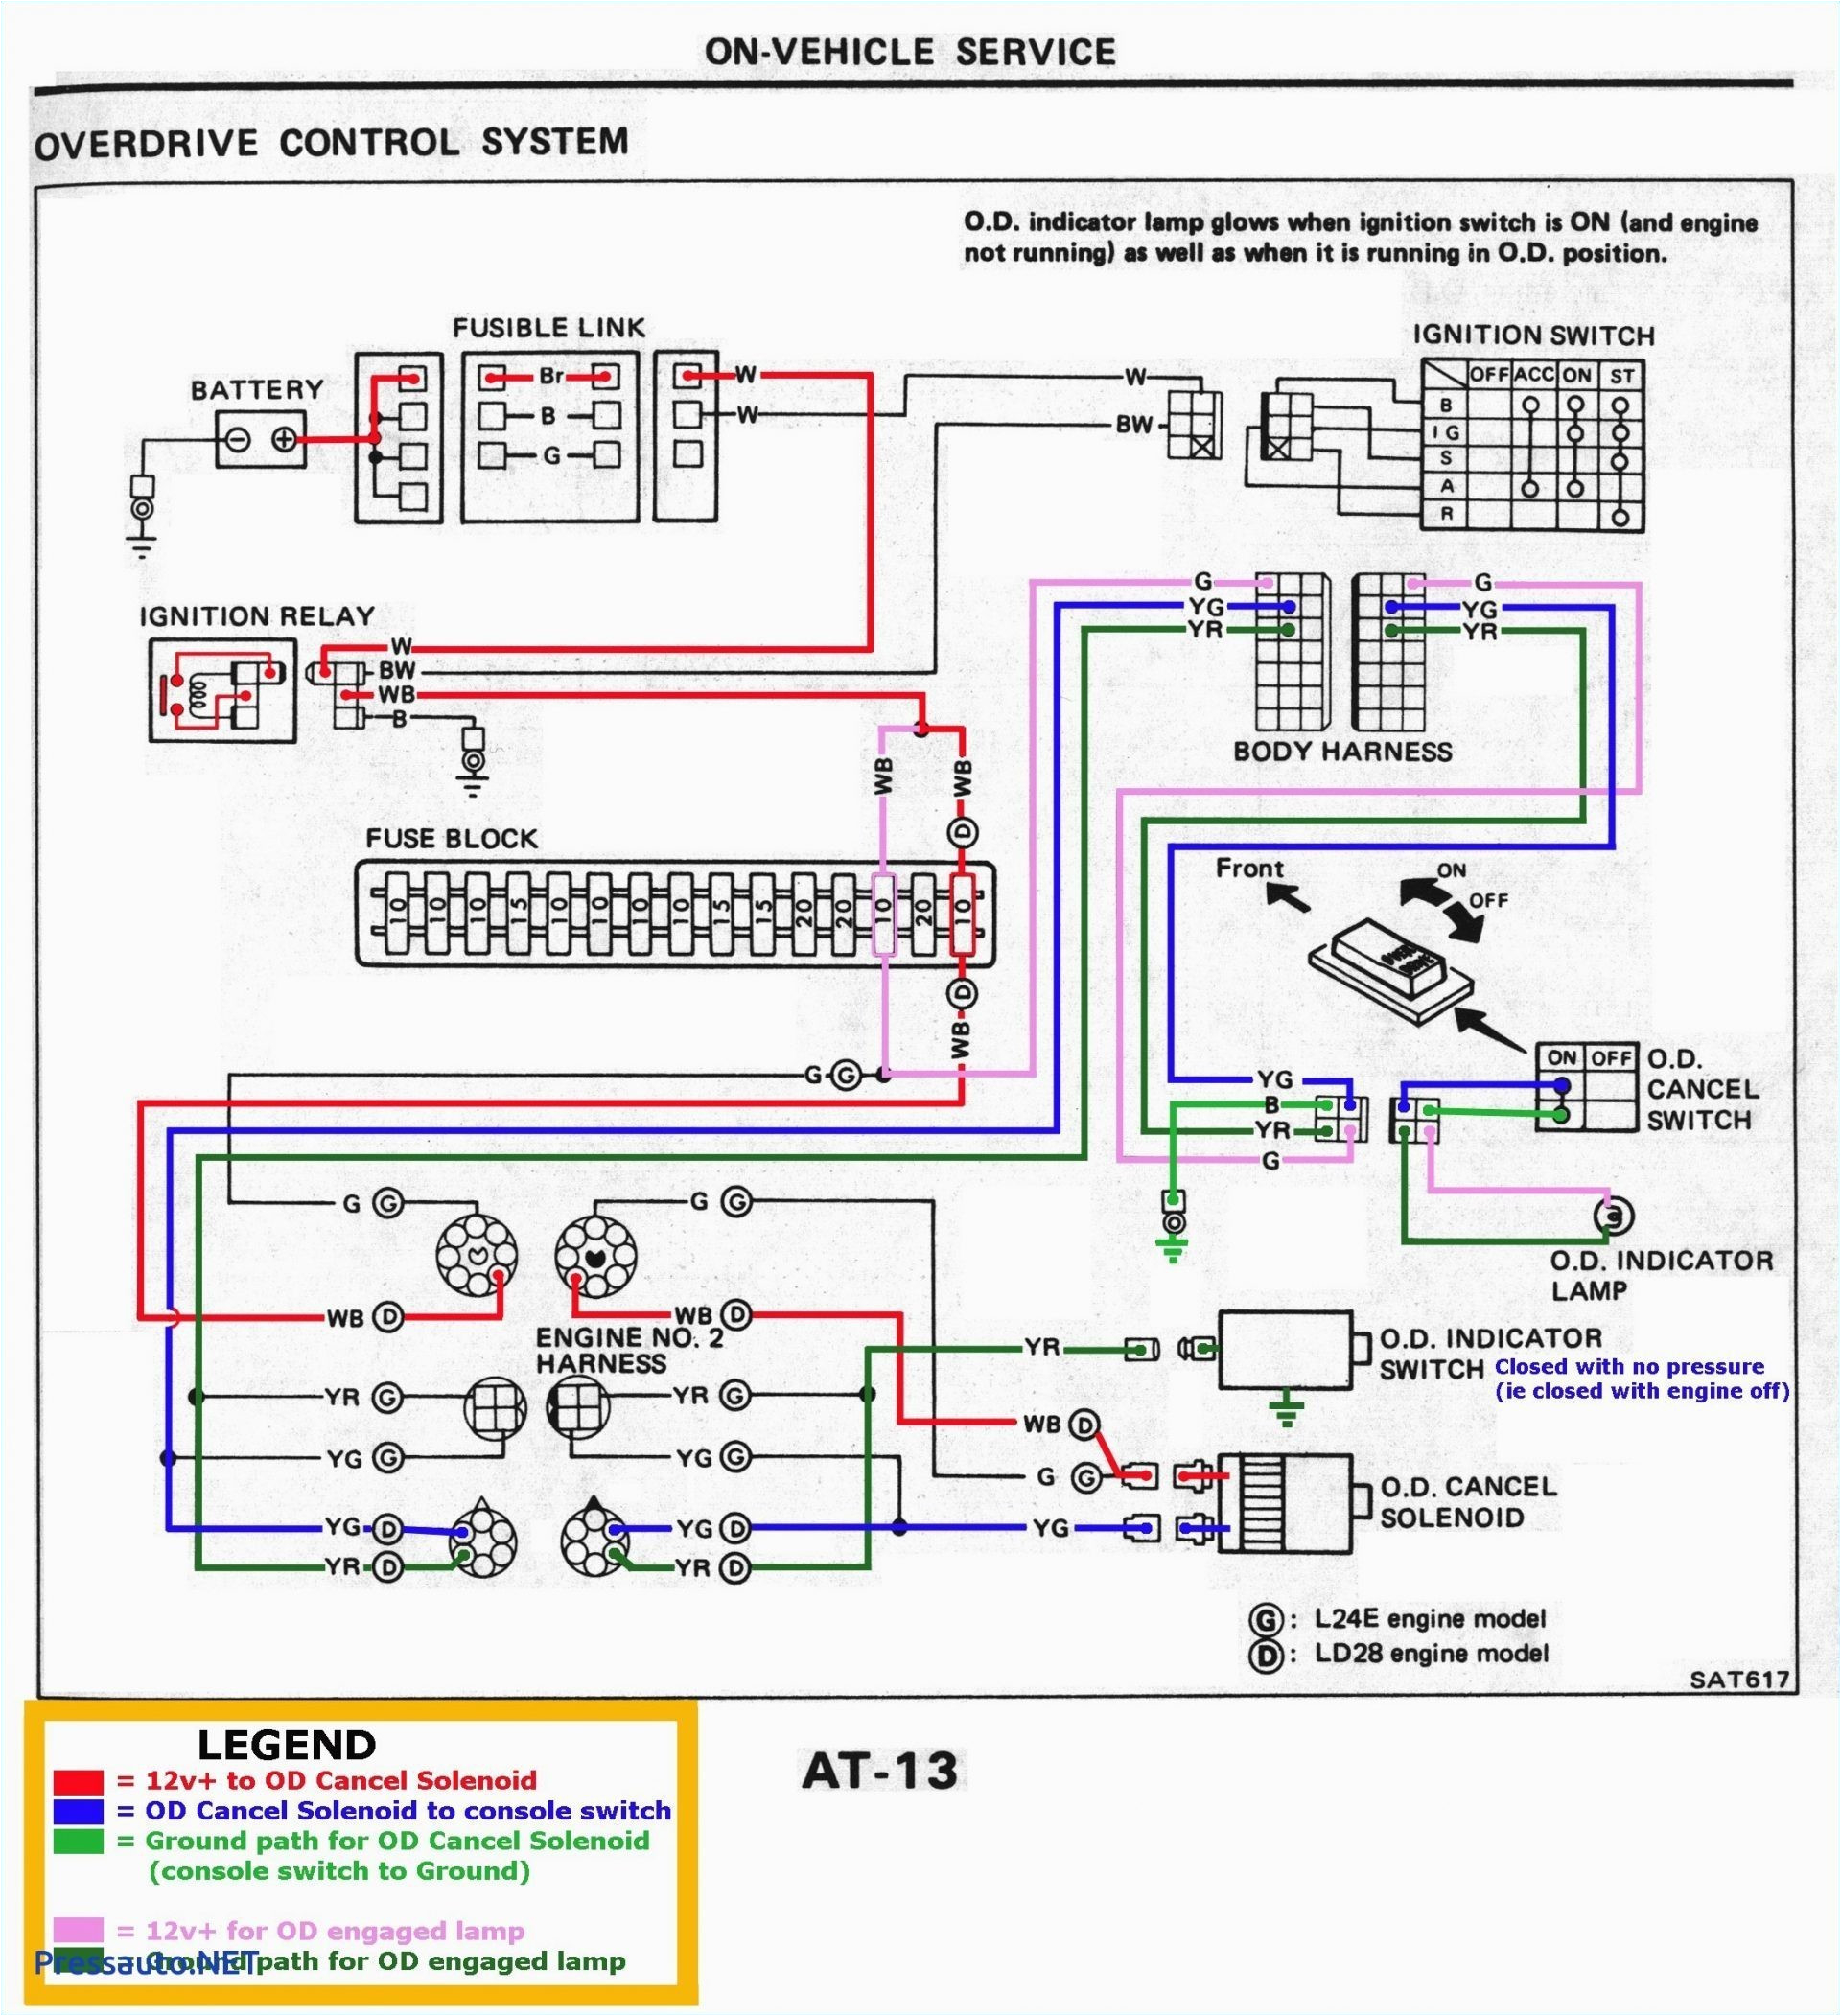 Parallel Wiring Diagram for Recessed Lights | autocardesign domestic wiring diagram for lights 